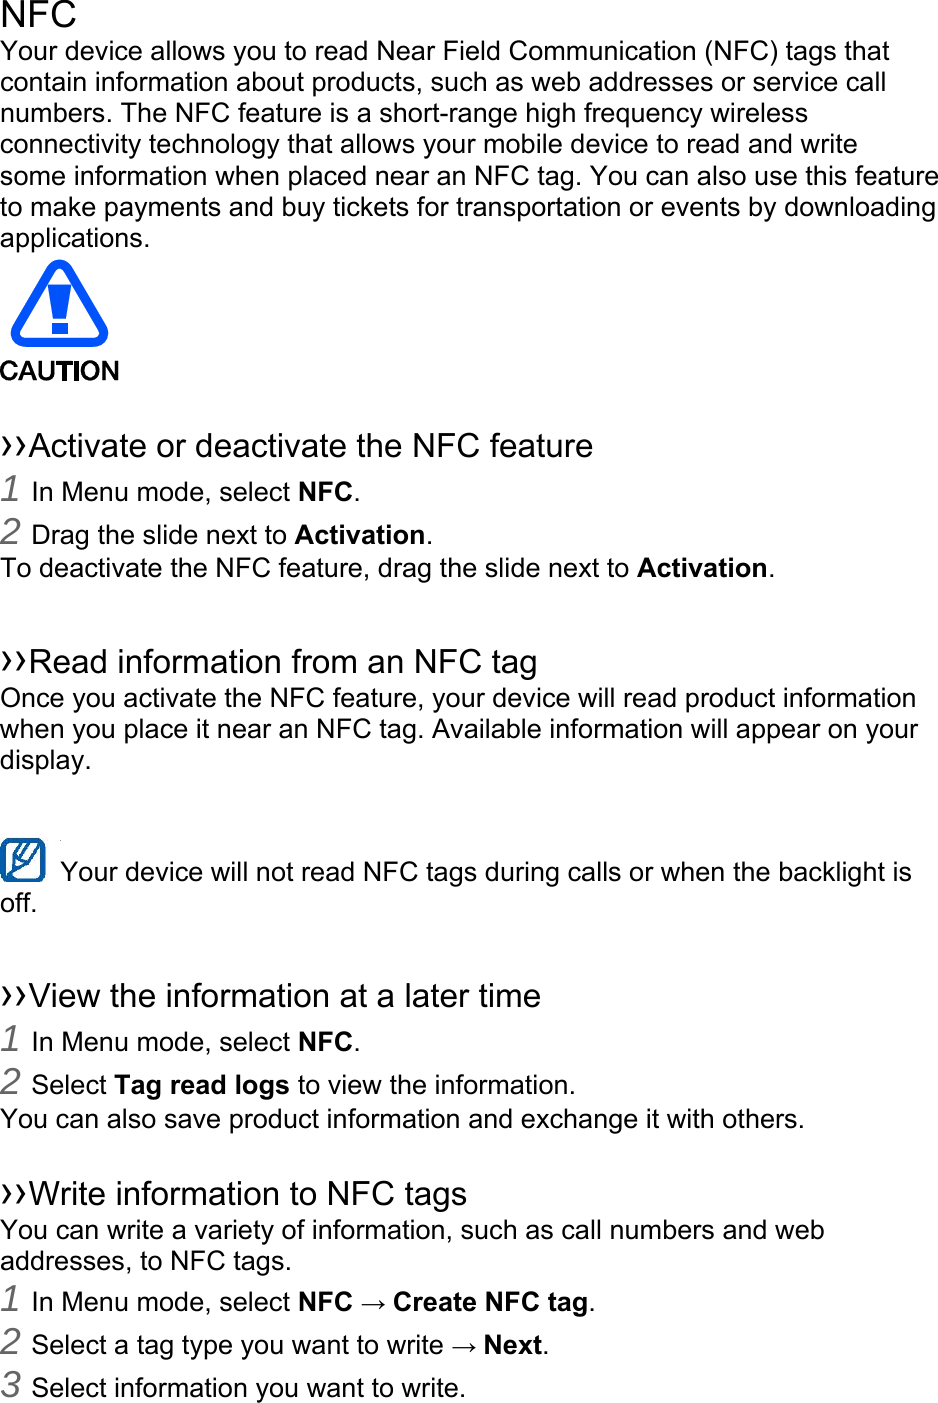 NFC Your device allows you to read Near Field Communication (NFC) tags that contain information about products, such as web addresses or service call numbers. The NFC feature is a short-range high frequency wireless connectivity technology that allows your mobile device to read and write some information when placed near an NFC tag. You can also use this feature to make payments and buy tickets for transportation or events by downloading applications.    ››Activate or deactivate the NFC feature 1 In Menu mode, select NFC. 2 Drag the slide next to Activation. To deactivate the NFC feature, drag the slide next to Activation.  ››Read information from an NFC tag Once you activate the NFC feature, your device will read product information when you place it near an NFC tag. Available information will appear on your display.  Your device will not read NFC tags during calls or when the backlight is   off.  ››View the information at a later time 1 In Menu mode, select NFC. 2 Select Tag read logs to view the information. You can also save product information and exchange it with others.  ››Write information to NFC tags   You can write a variety of information, such as call numbers and web addresses, to NFC tags. 1 In Menu mode, select NFC → Create NFC tag. 2 Select a tag type you want to write → Next. 3 Select information you want to write. 